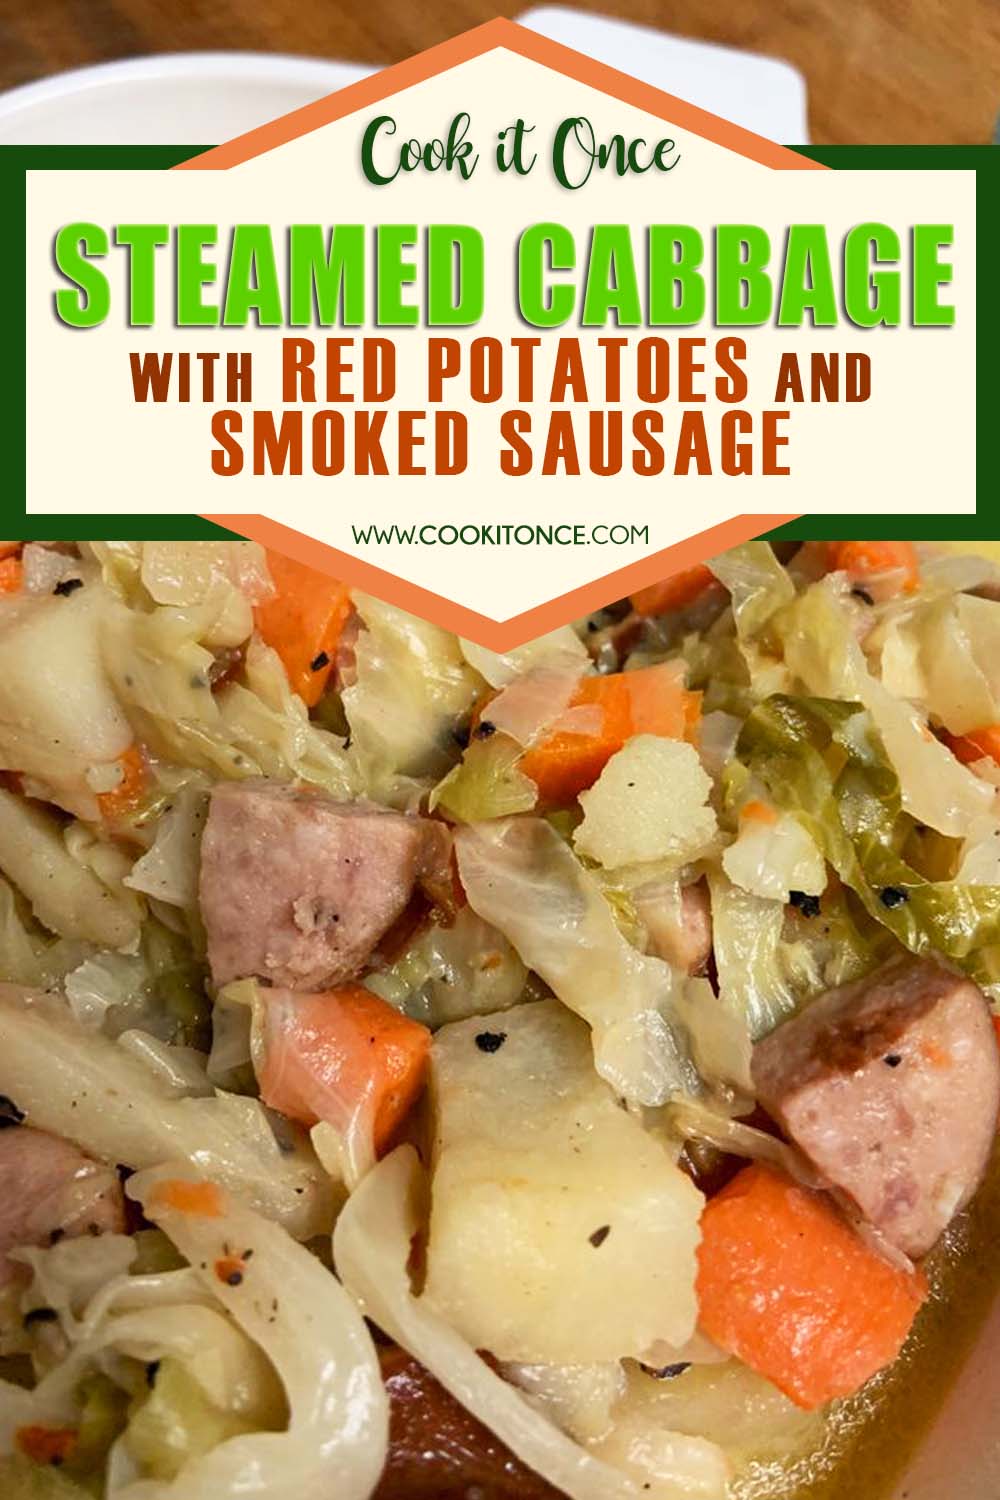 Cabbage with Red Potatoes and Smoked Sausage Recipe